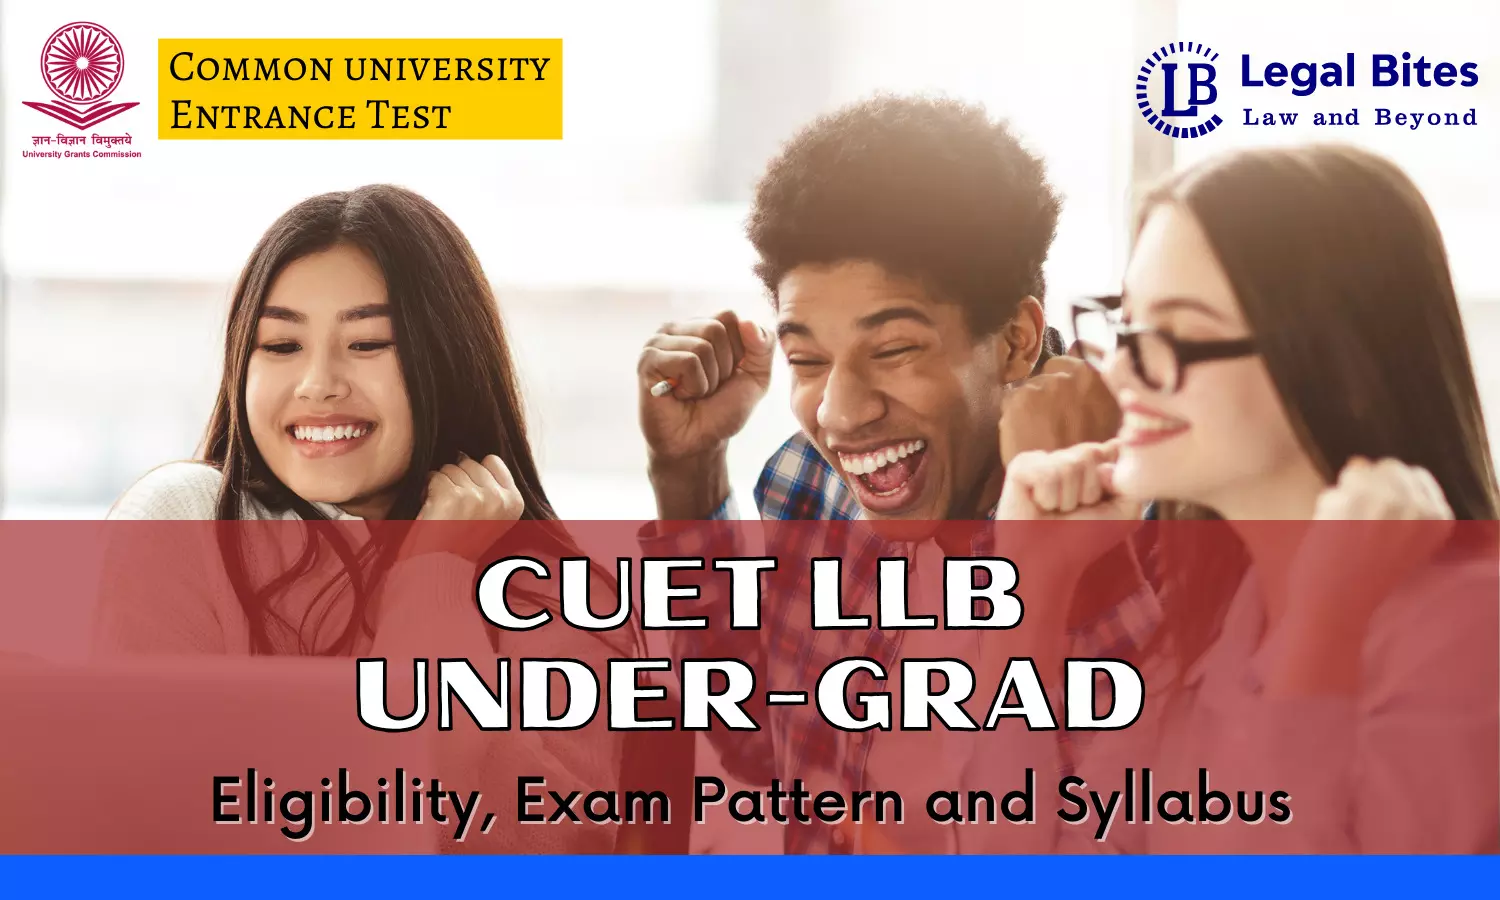 CUET LLB | Eligibility, Exam Pattern & Syllabus - All You Need to Know